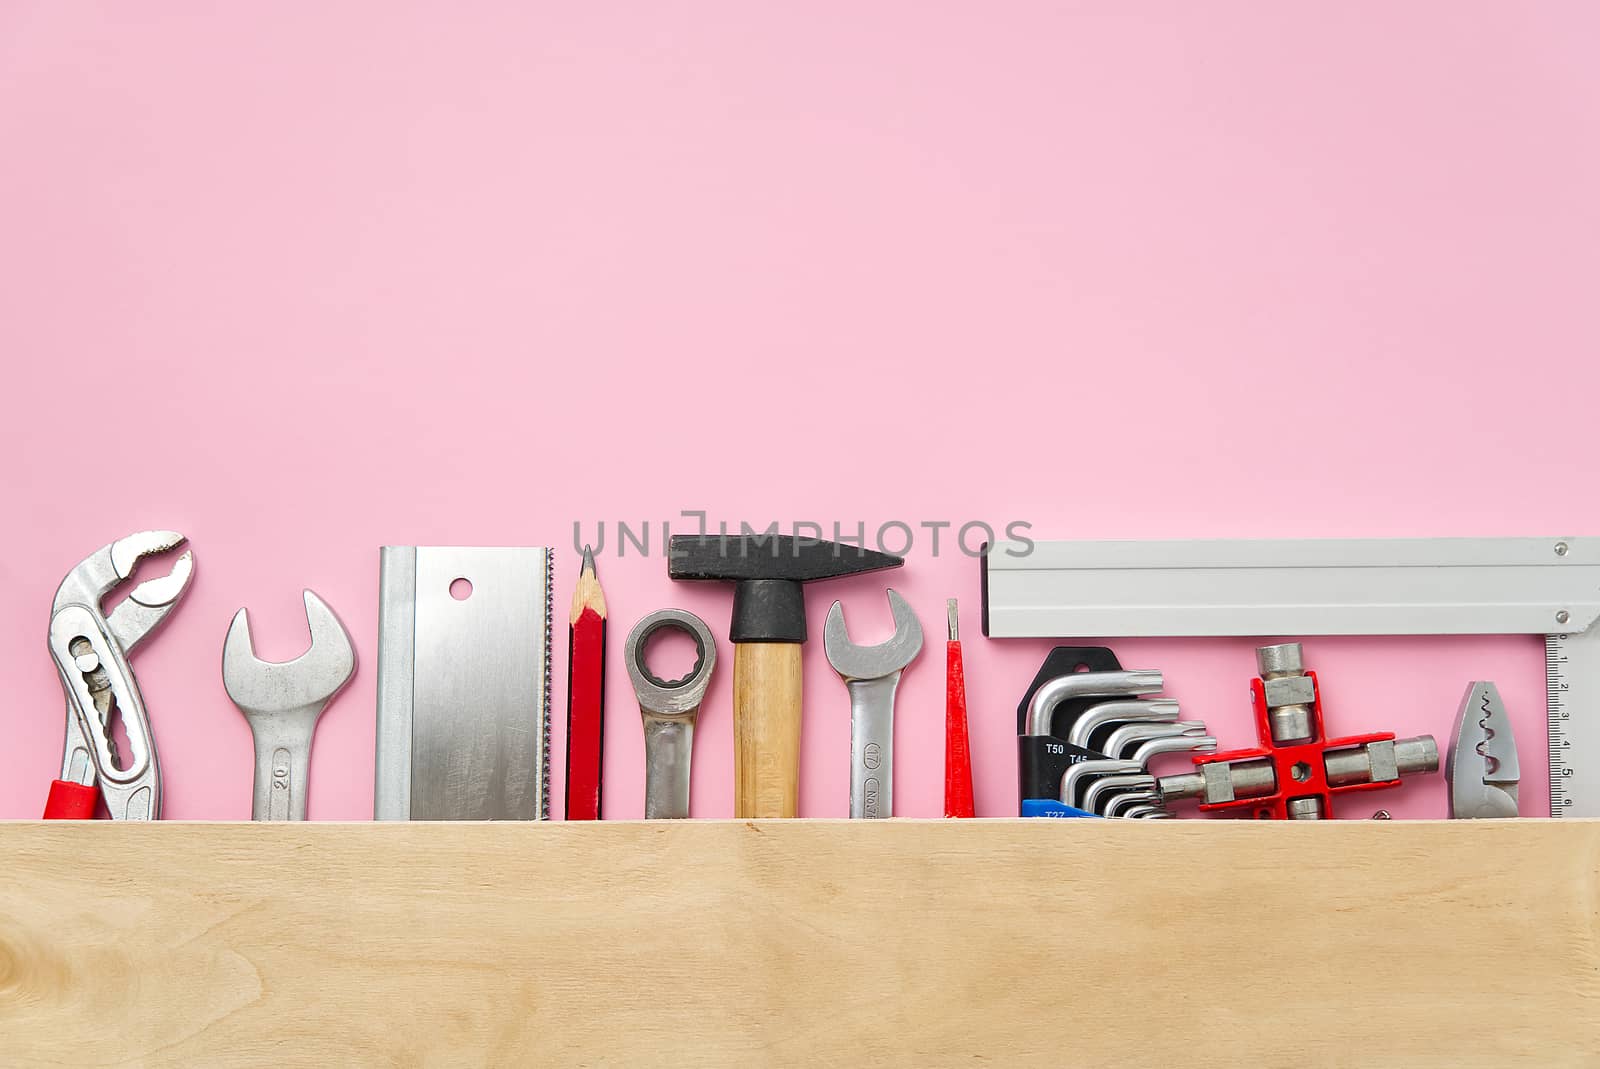 Home maintenance, service, diy concept. Tools for wood, metal and other construction work. Top view on DIY tools. home repairs. on pink background